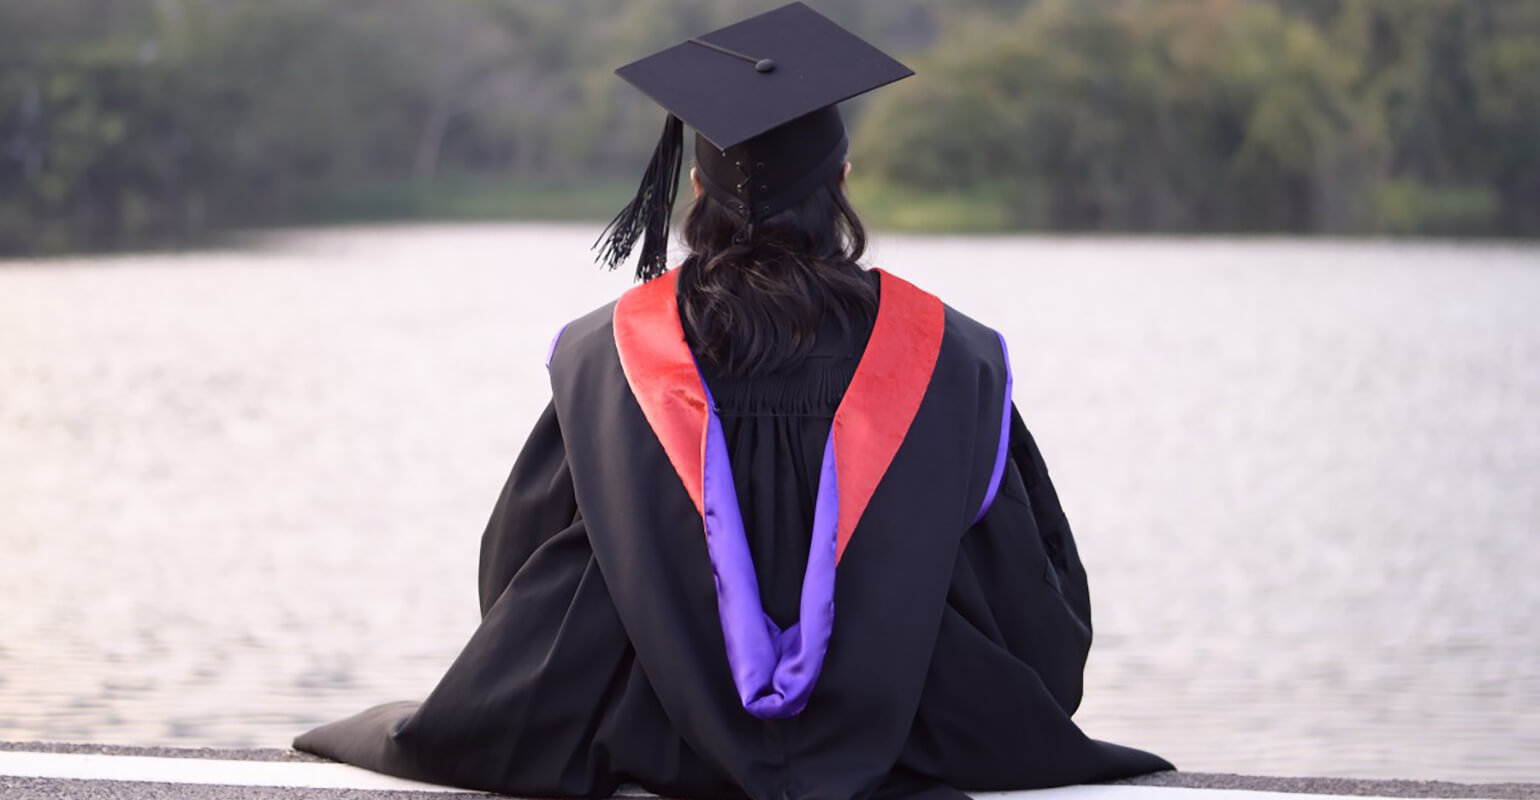 An image of a person in a graduation cap and gown sitting on a ledge. They are looking over a lake with a line of trees on the other side of the water.